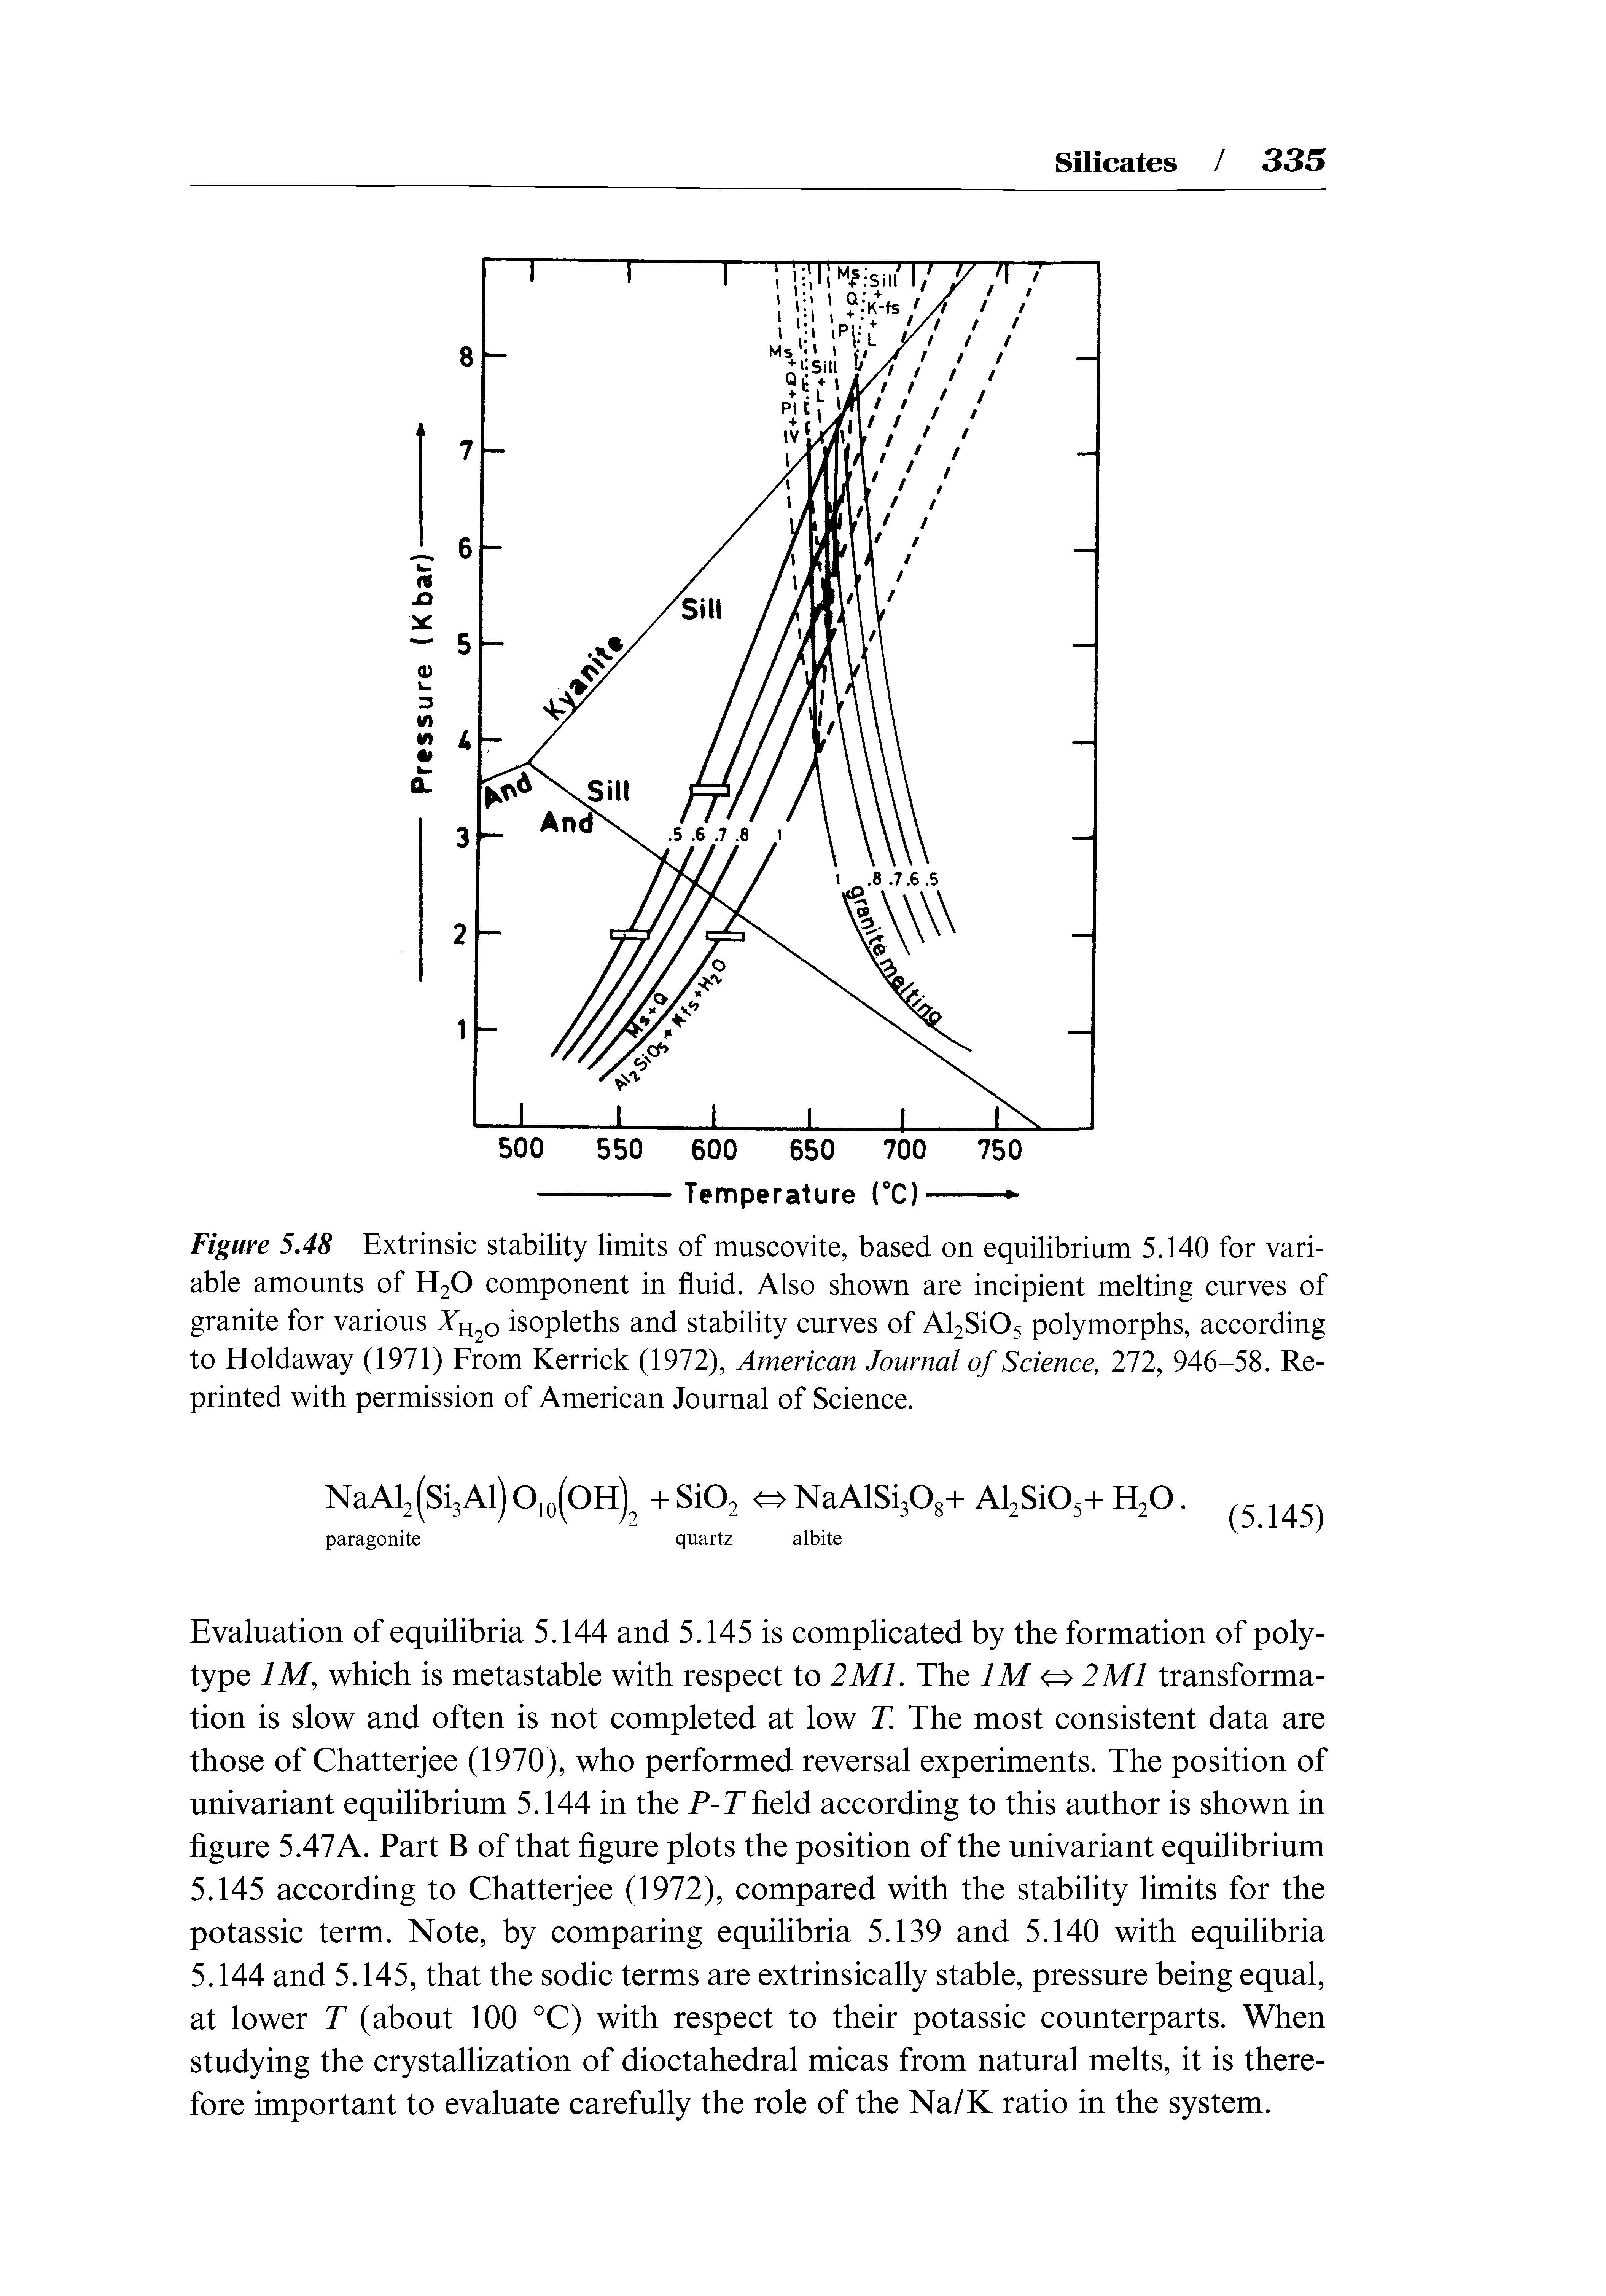 Figure 5.48 Extrinsic stability limits of muscovite, based on equilibrium 5.140 for variable amounts of H2O component in fluid. Also shown are incipient melting curves of granite for various h20 isopleths and stability curves of Al2Si05 polymorphs, according to Holdaway (1971) From Kerrick (1972), American Journal of Science, 212, 946-58. Reprinted with permission of American Journal of Science.